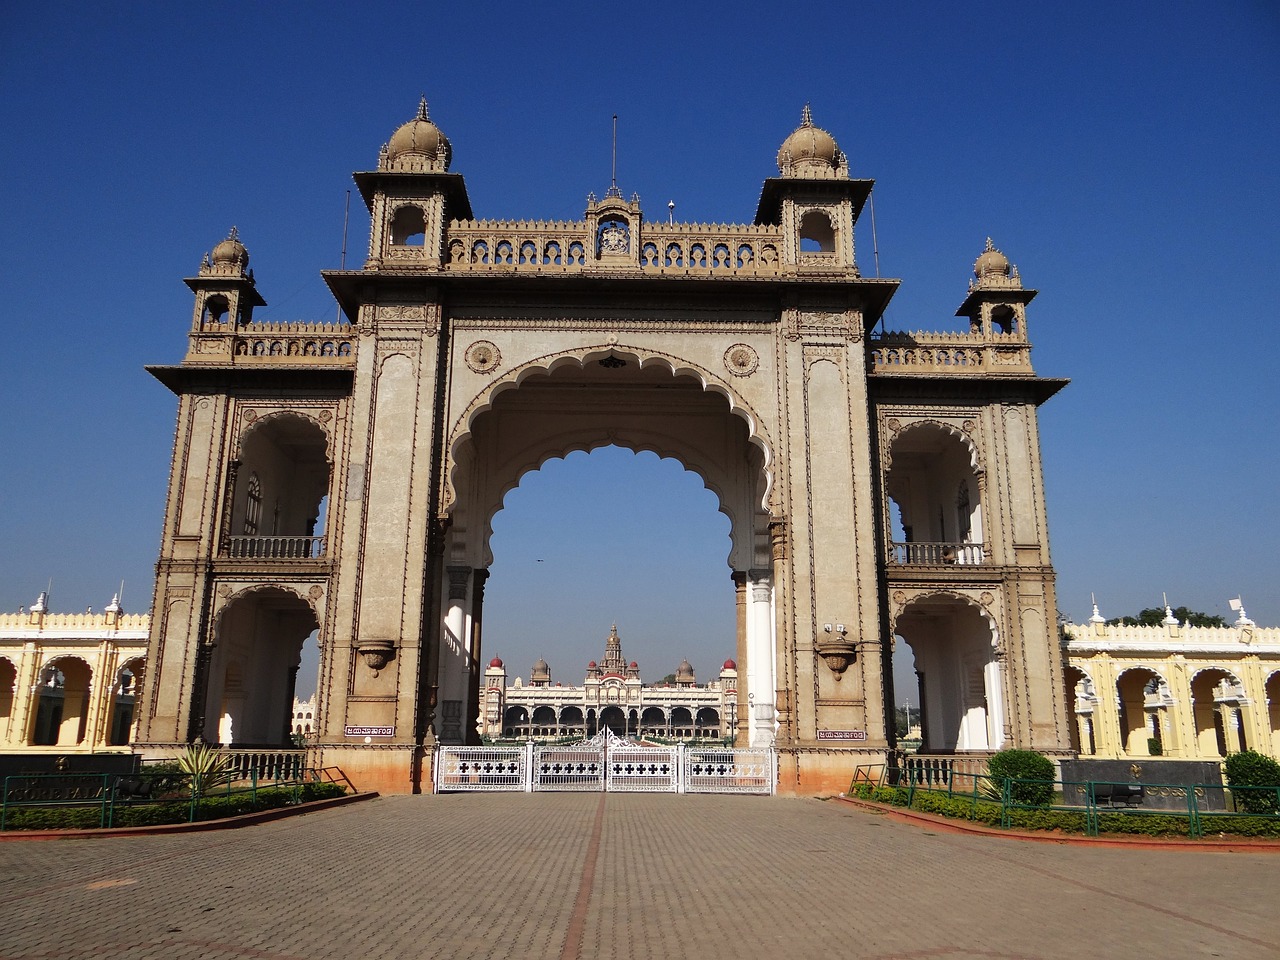 Royal Mysore: Palaces, Gardens, and Local Delights